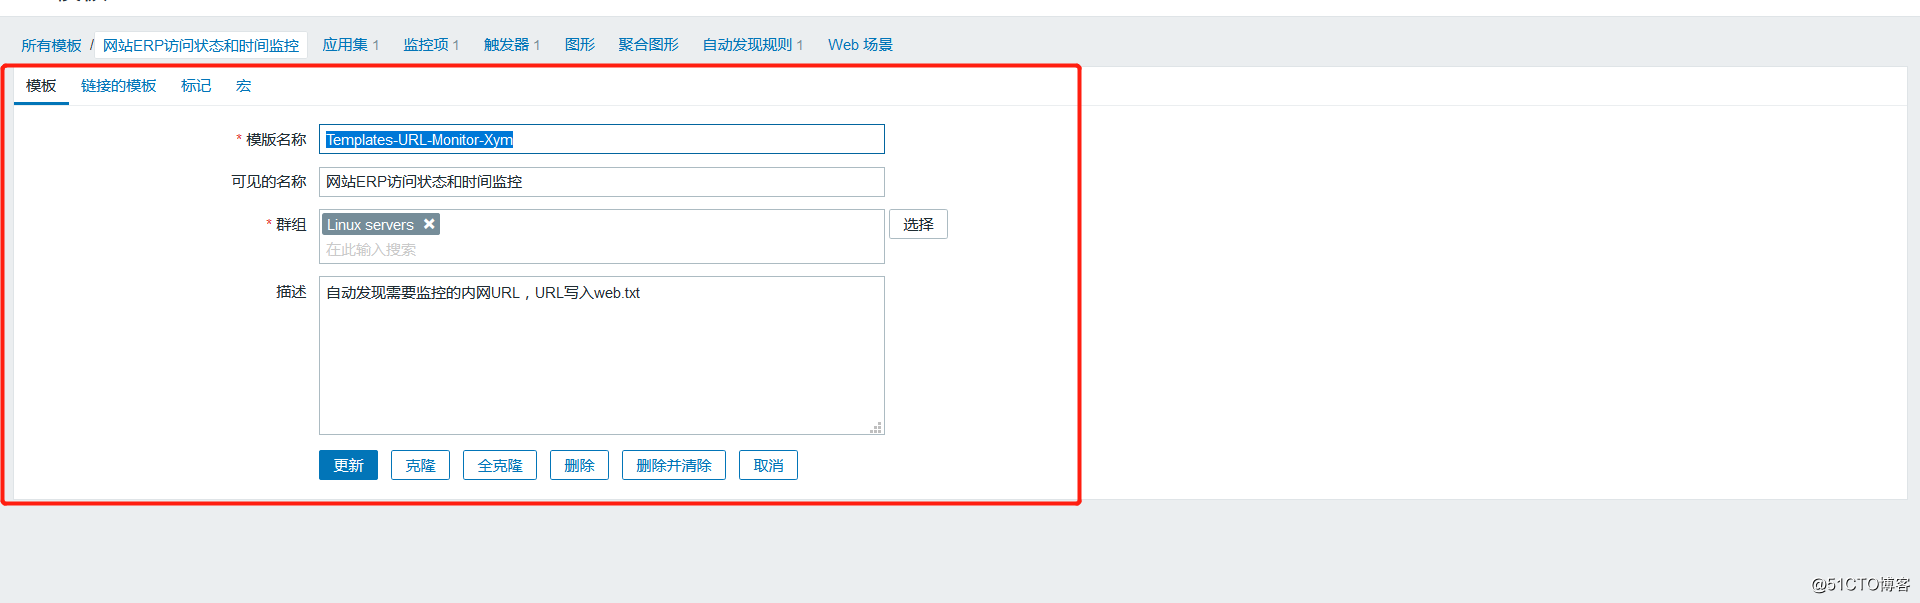 4: zabbix5.0 automatically discovers website domain names and monitors access status and request time